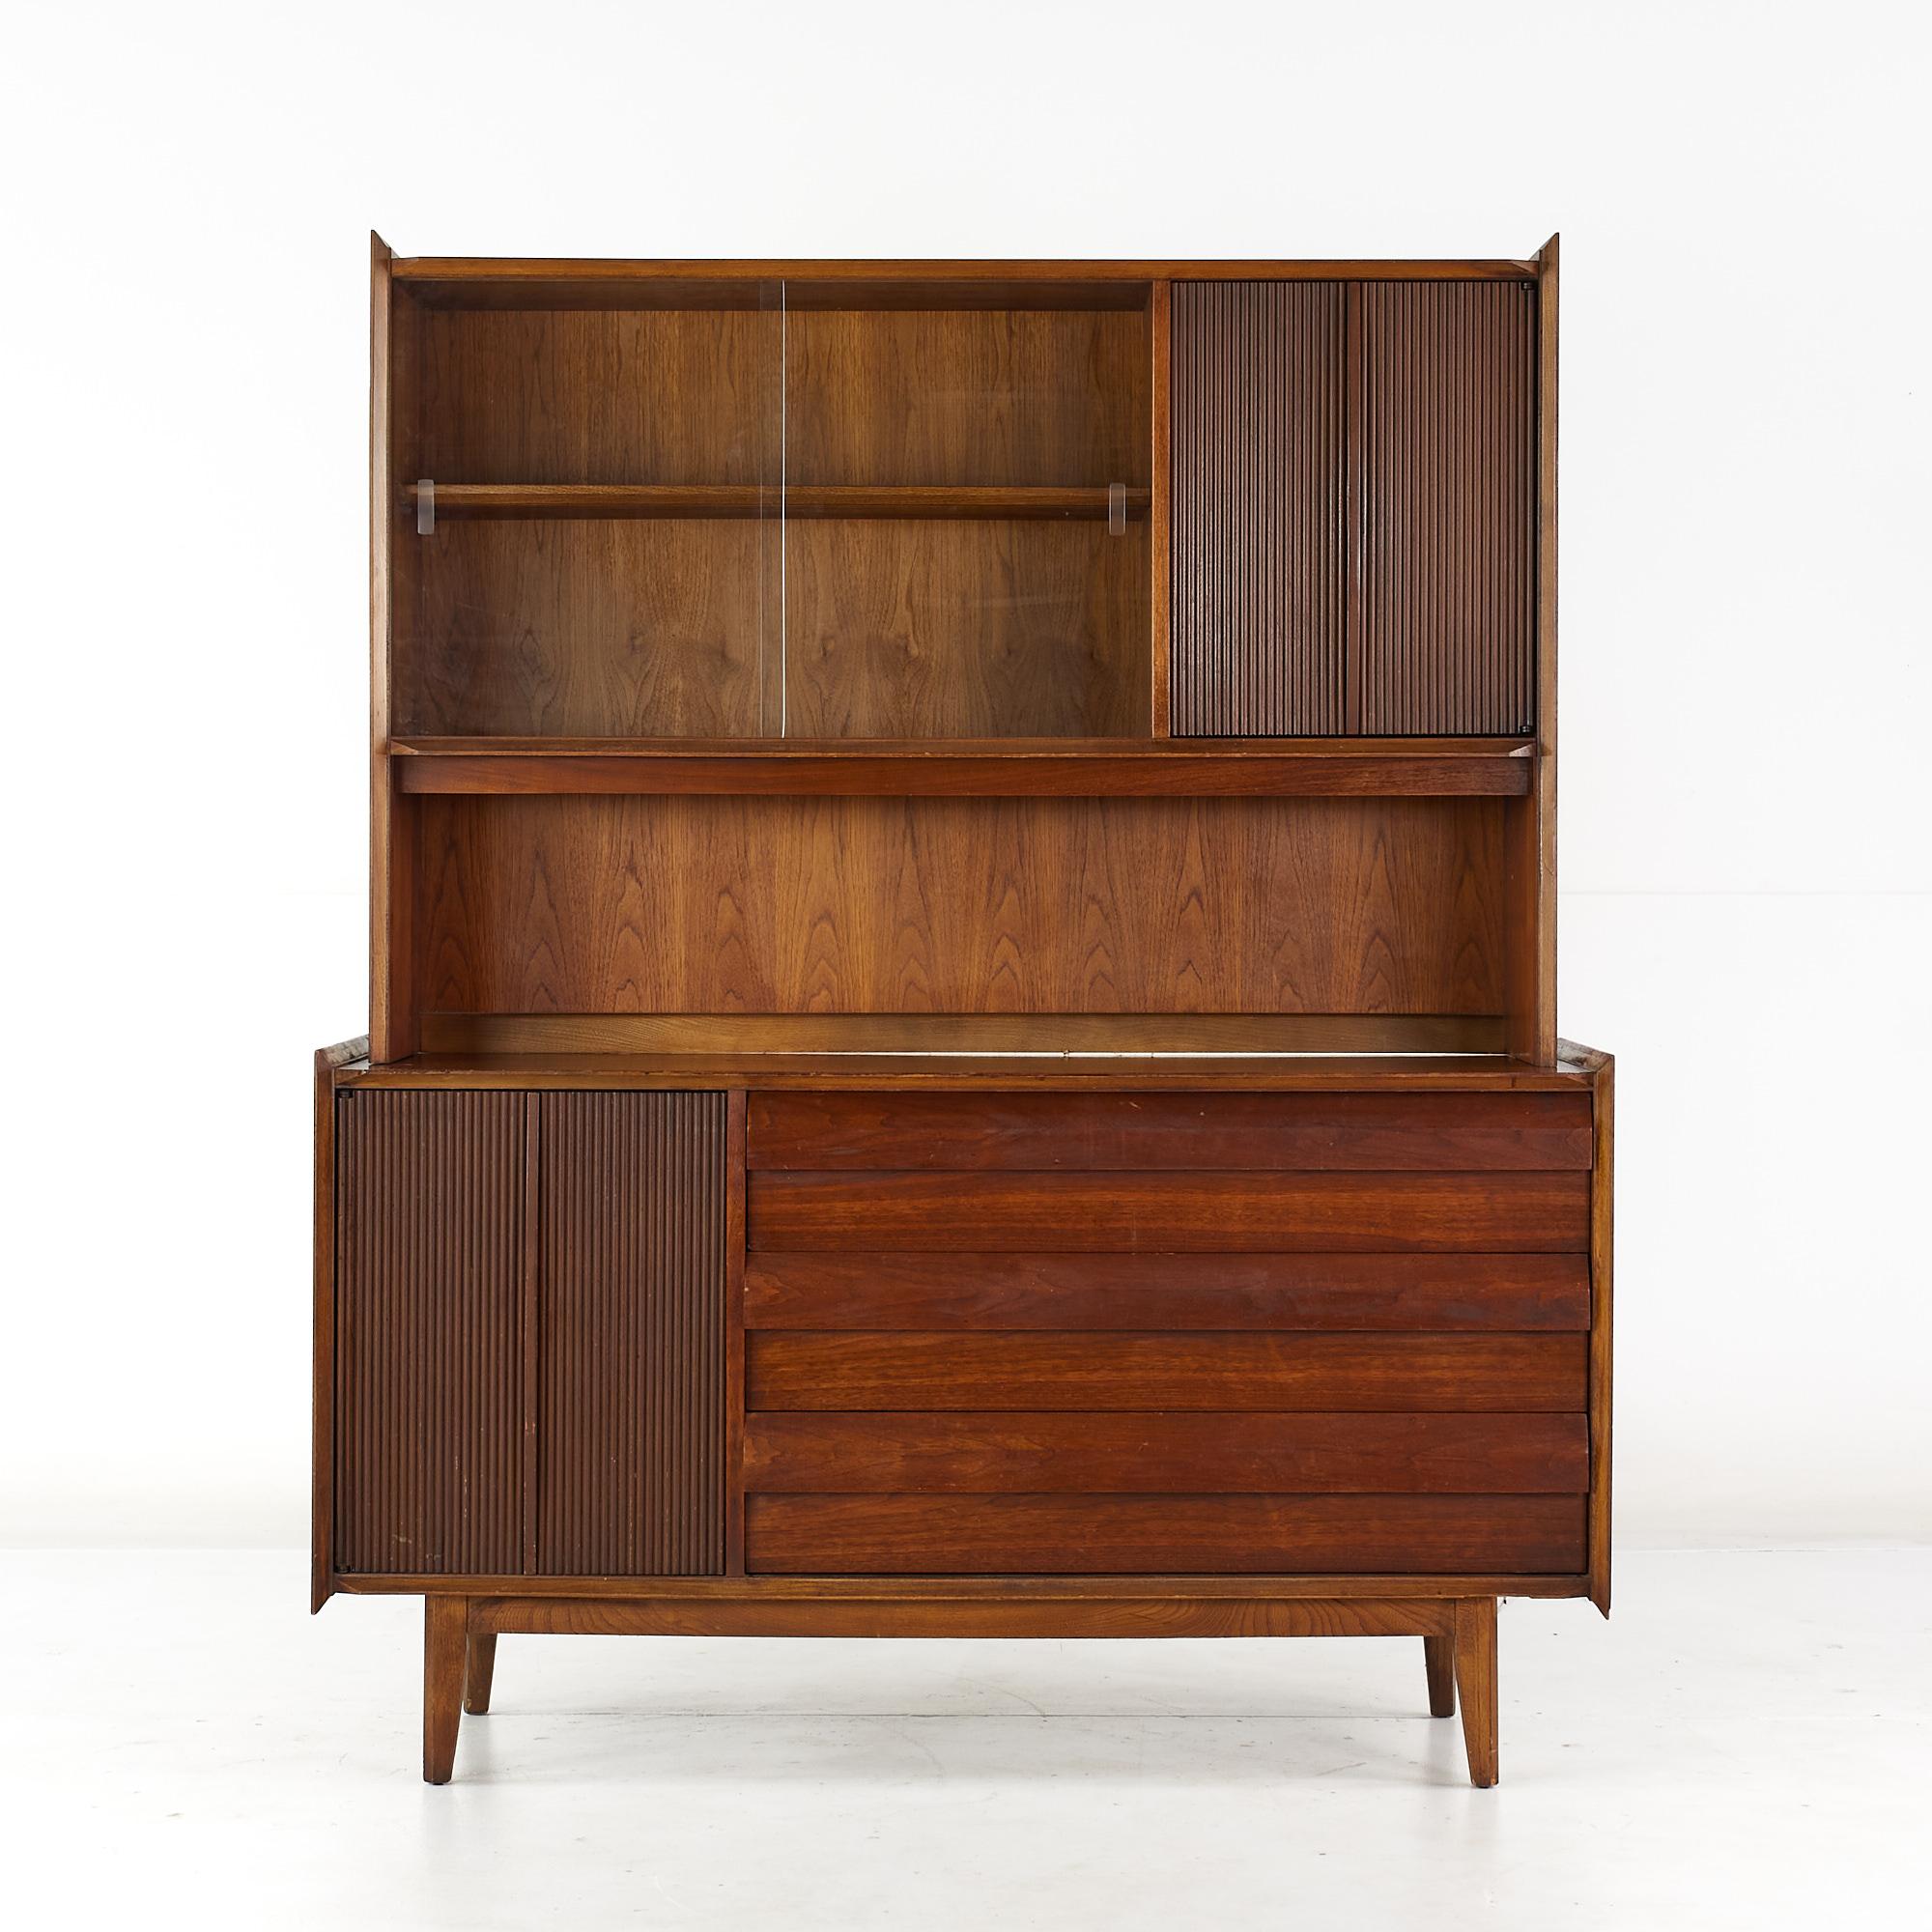 Lane first edition mid century walnut buffet and hutch

The buffet measures: 54 wide x 18 deep x 30 inches high
The hutch measures: 50.5 wide x 13 deep x 35.5 inches high
The combined height of the buffet and hutch is 65.5 inches

All pieces